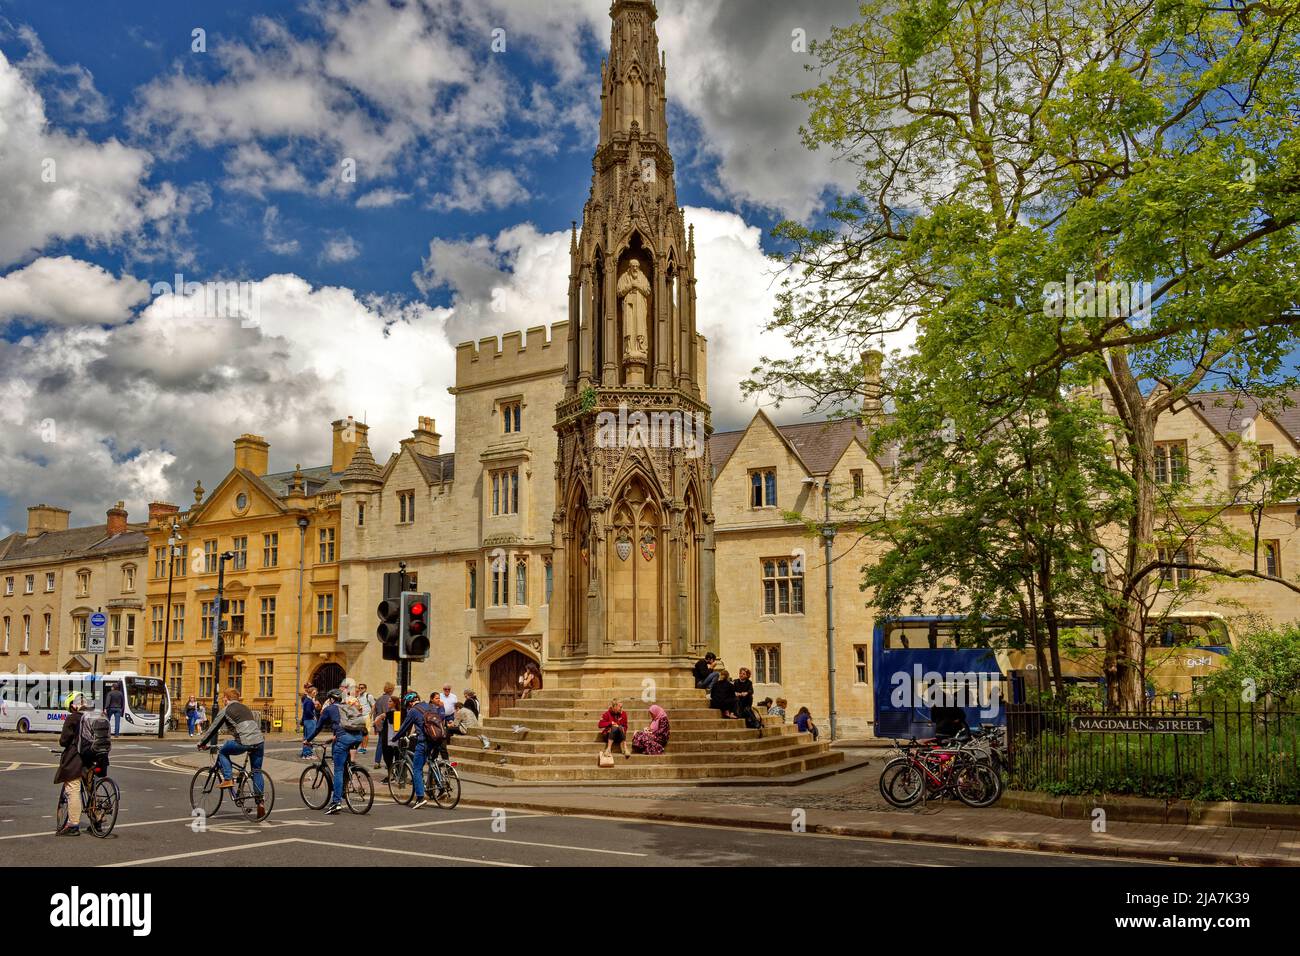 OXFORD CITY ENGLAND THE MARTYRS MEMORIAL MAGDALEN STREET WITH CYCLISTS WAITING AT THE TRAFFIC LIGHTS Stock Photo